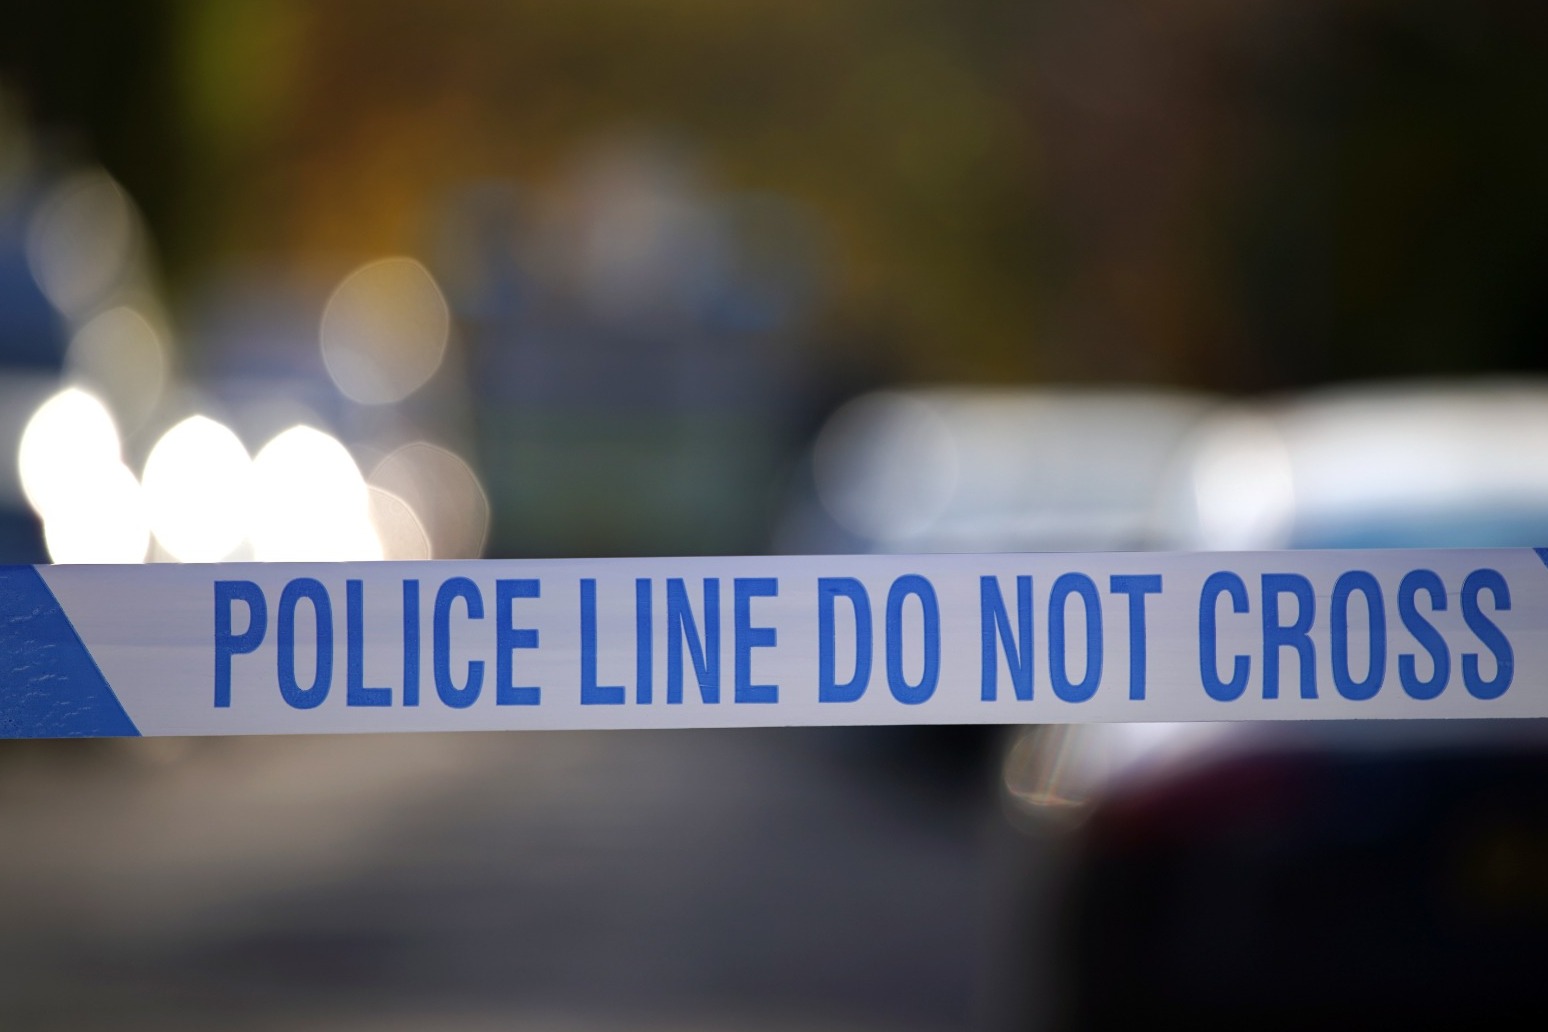 Derbyshire homes evacuated as man arrested on suspicion of explosive offences 